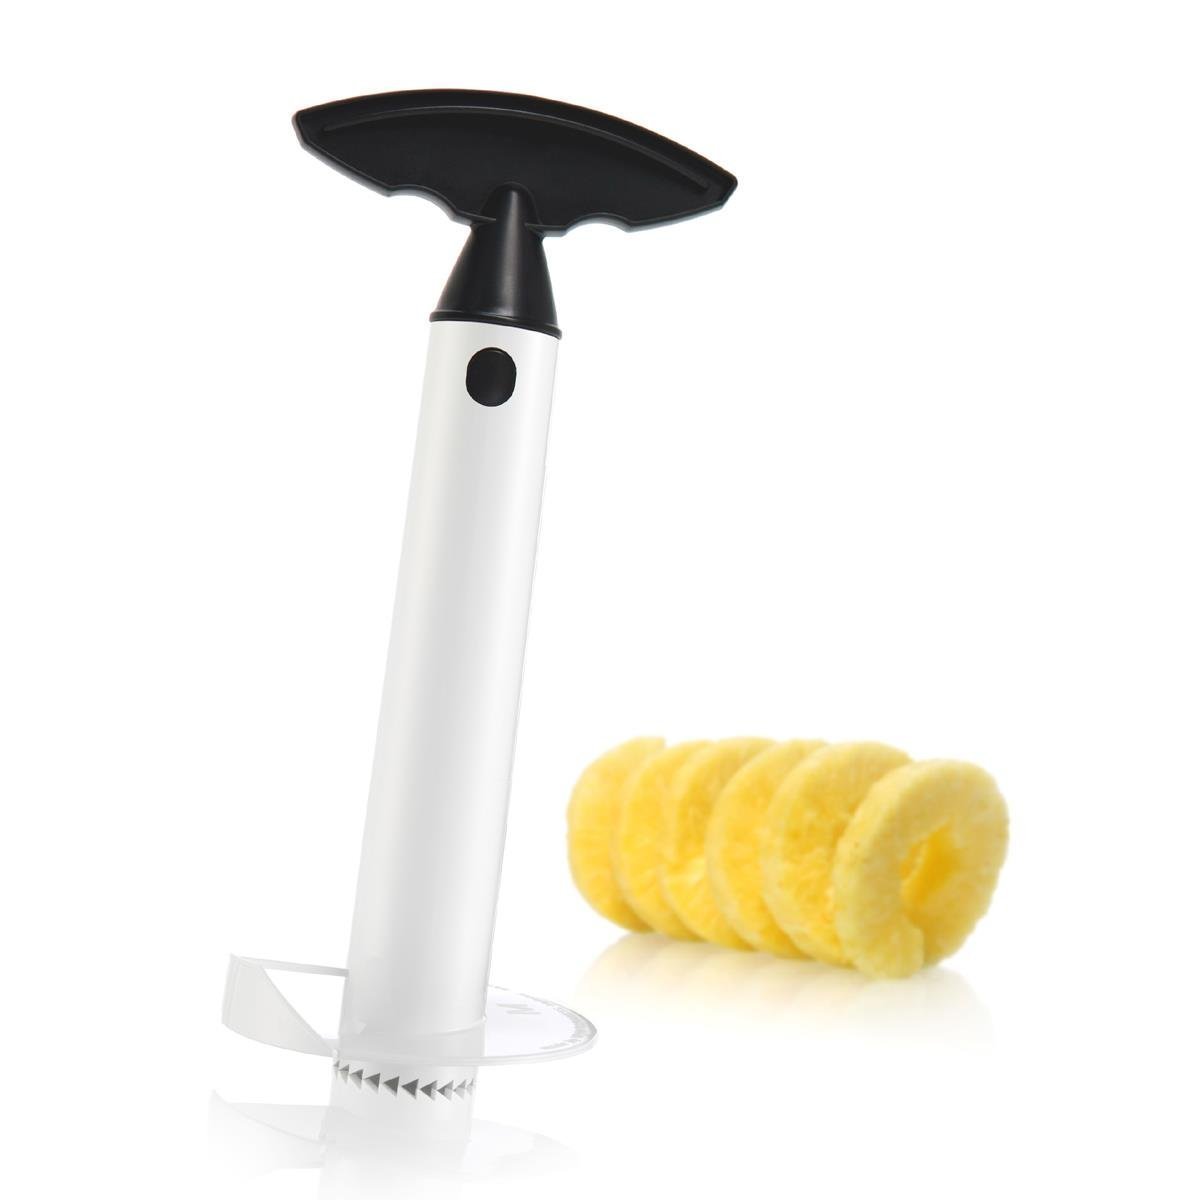 Picture of Tomorrows Kitchen 48522606 Pineapple Slicer with White & Black Handle - J Hook